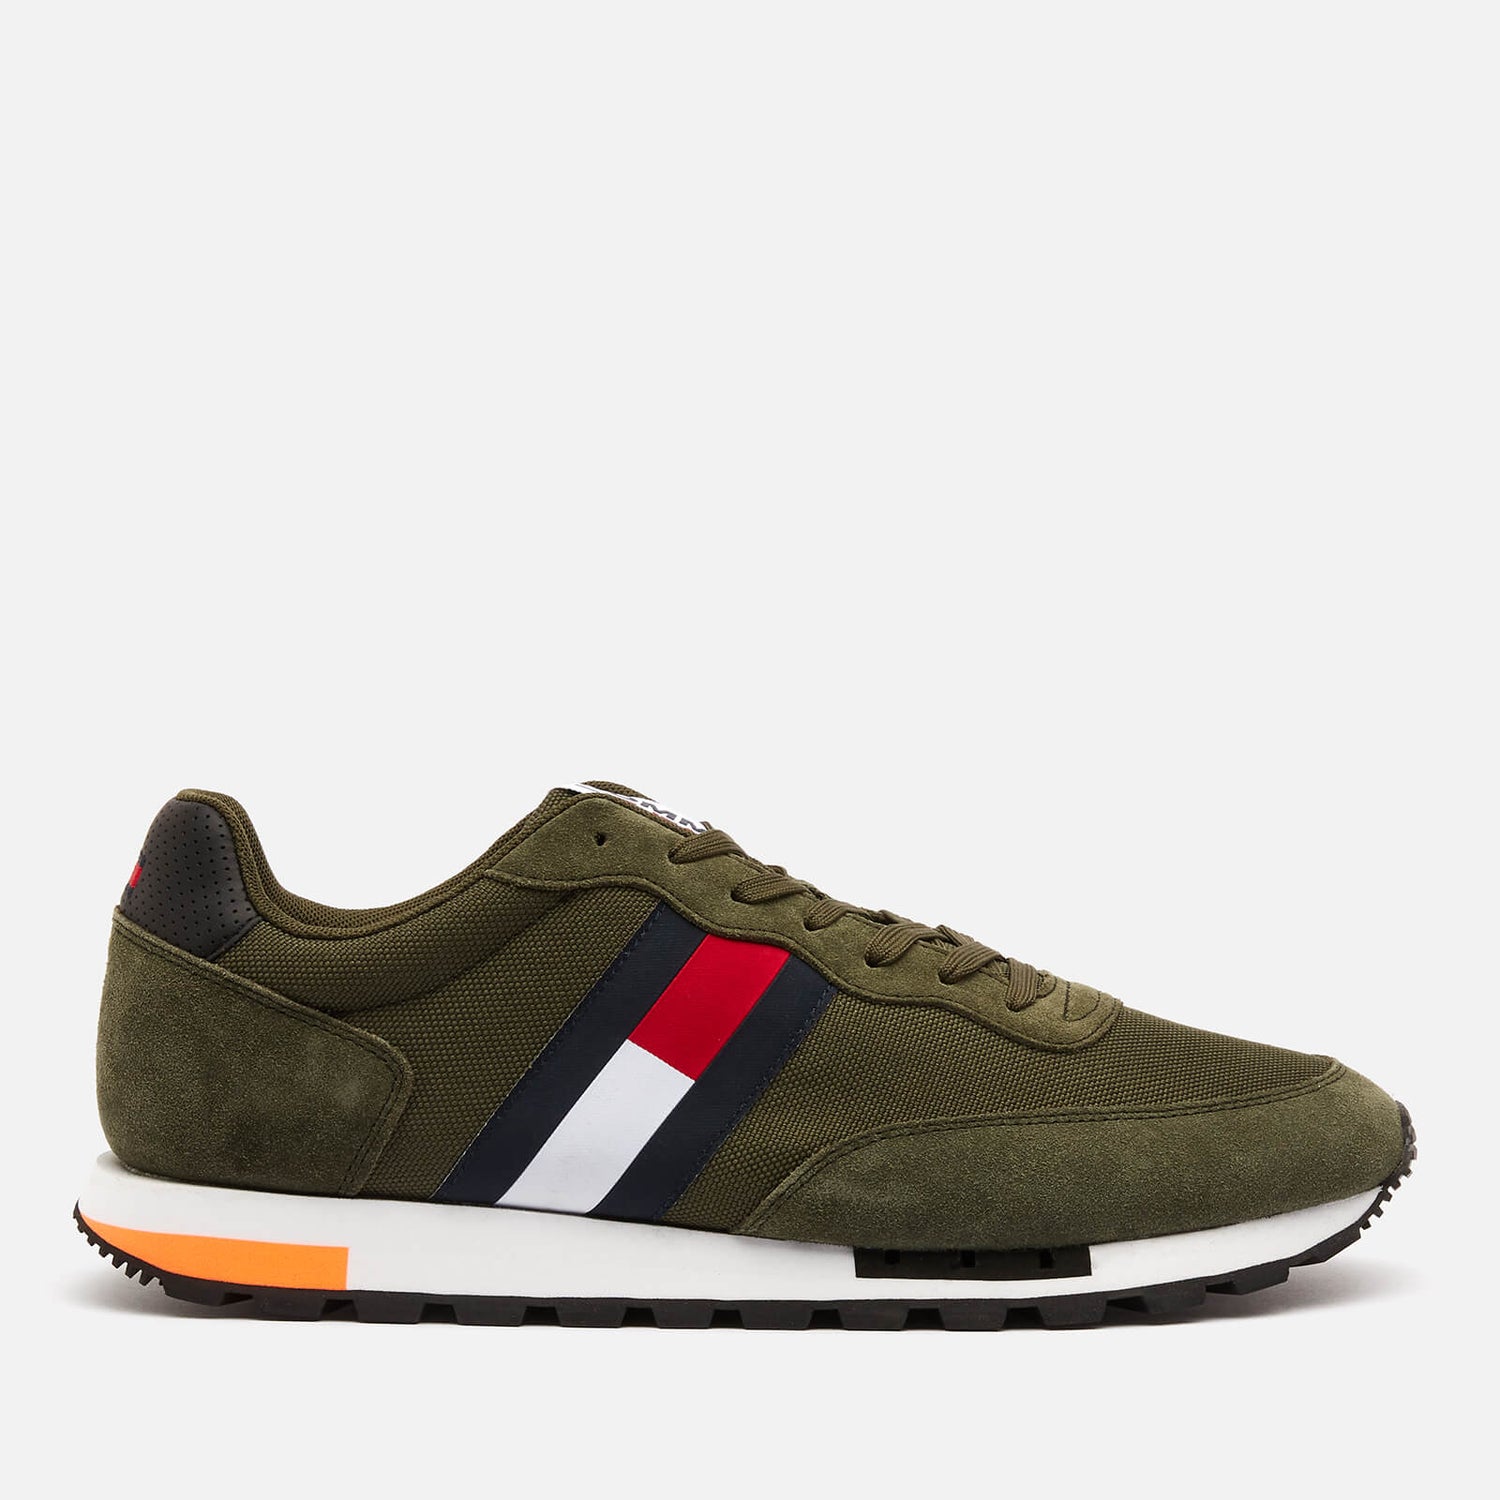 Tommy Jeans Men's Retro Mix Pop Running Style Trainers - Dark Olive